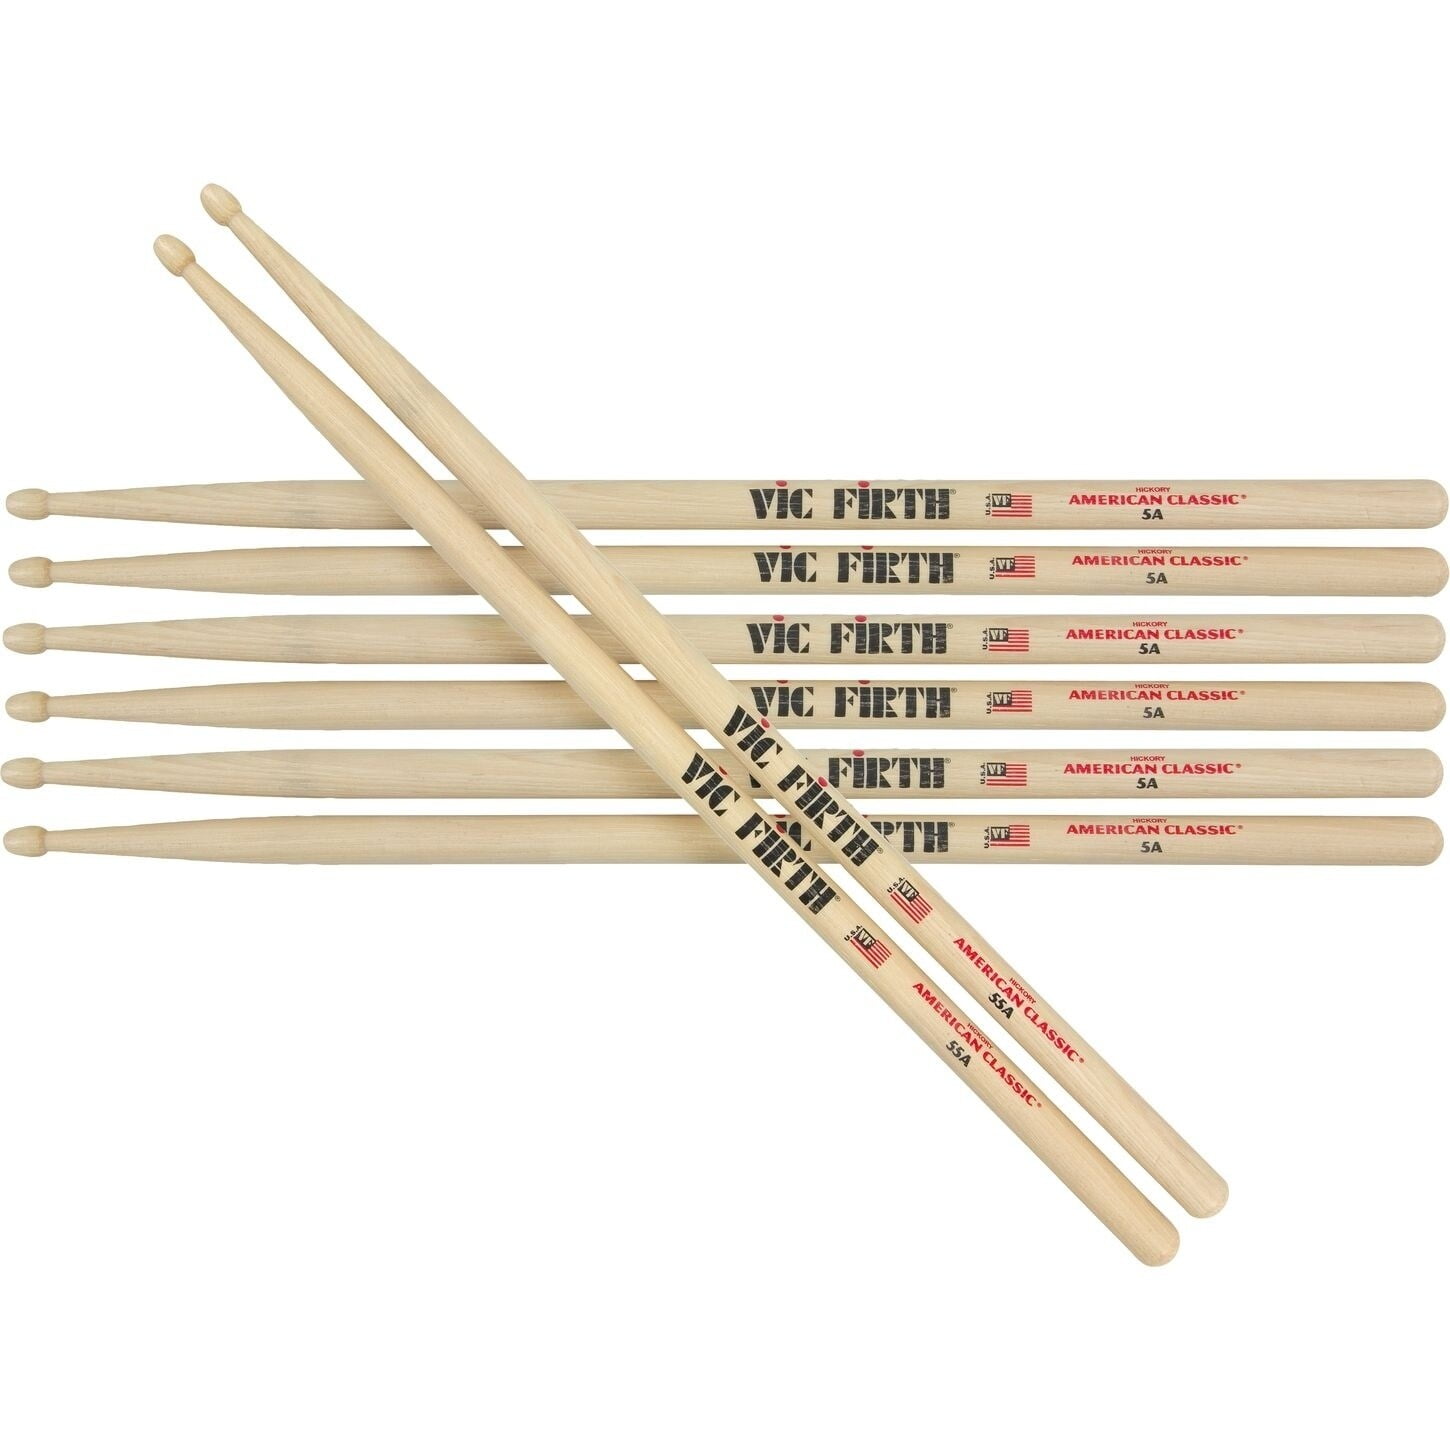 Vic Firth American Classic Hickory 5A Value Pack VFP5A3-5A « Drumsticks